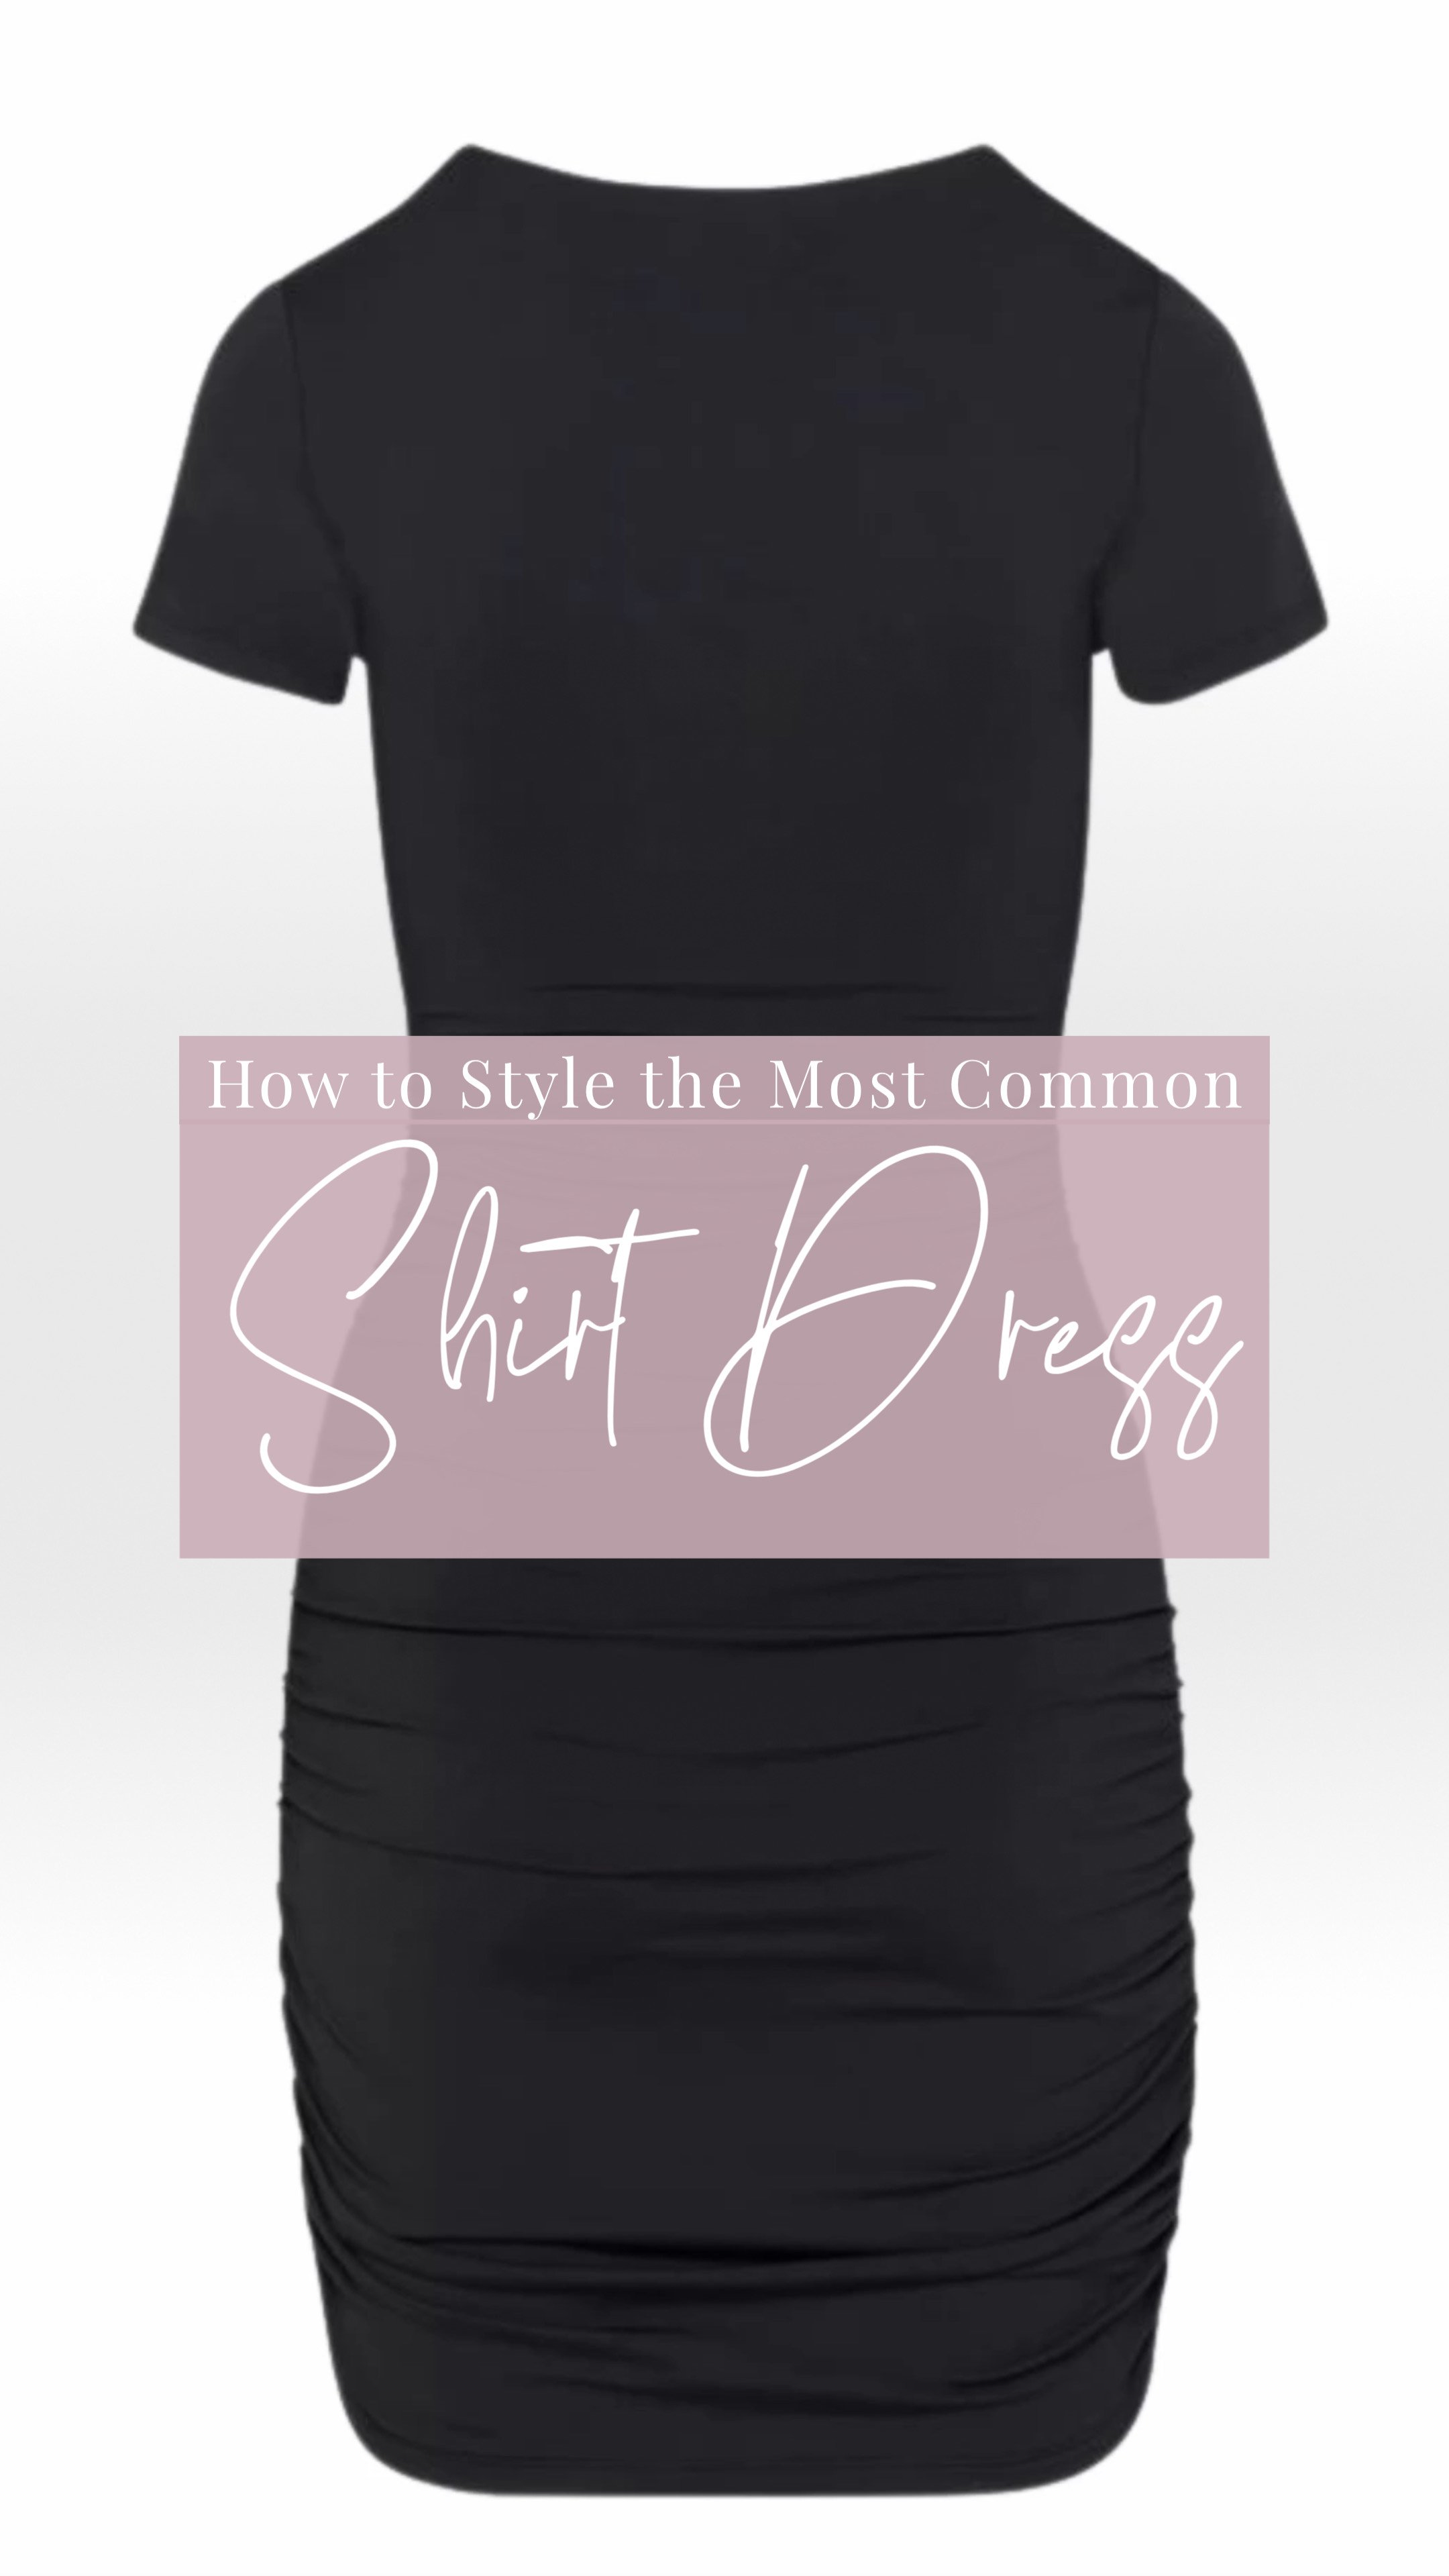 THE BLACK COTTON T-SHIRT DRESS IS THE MOST COMMON SHIRT DRESS!